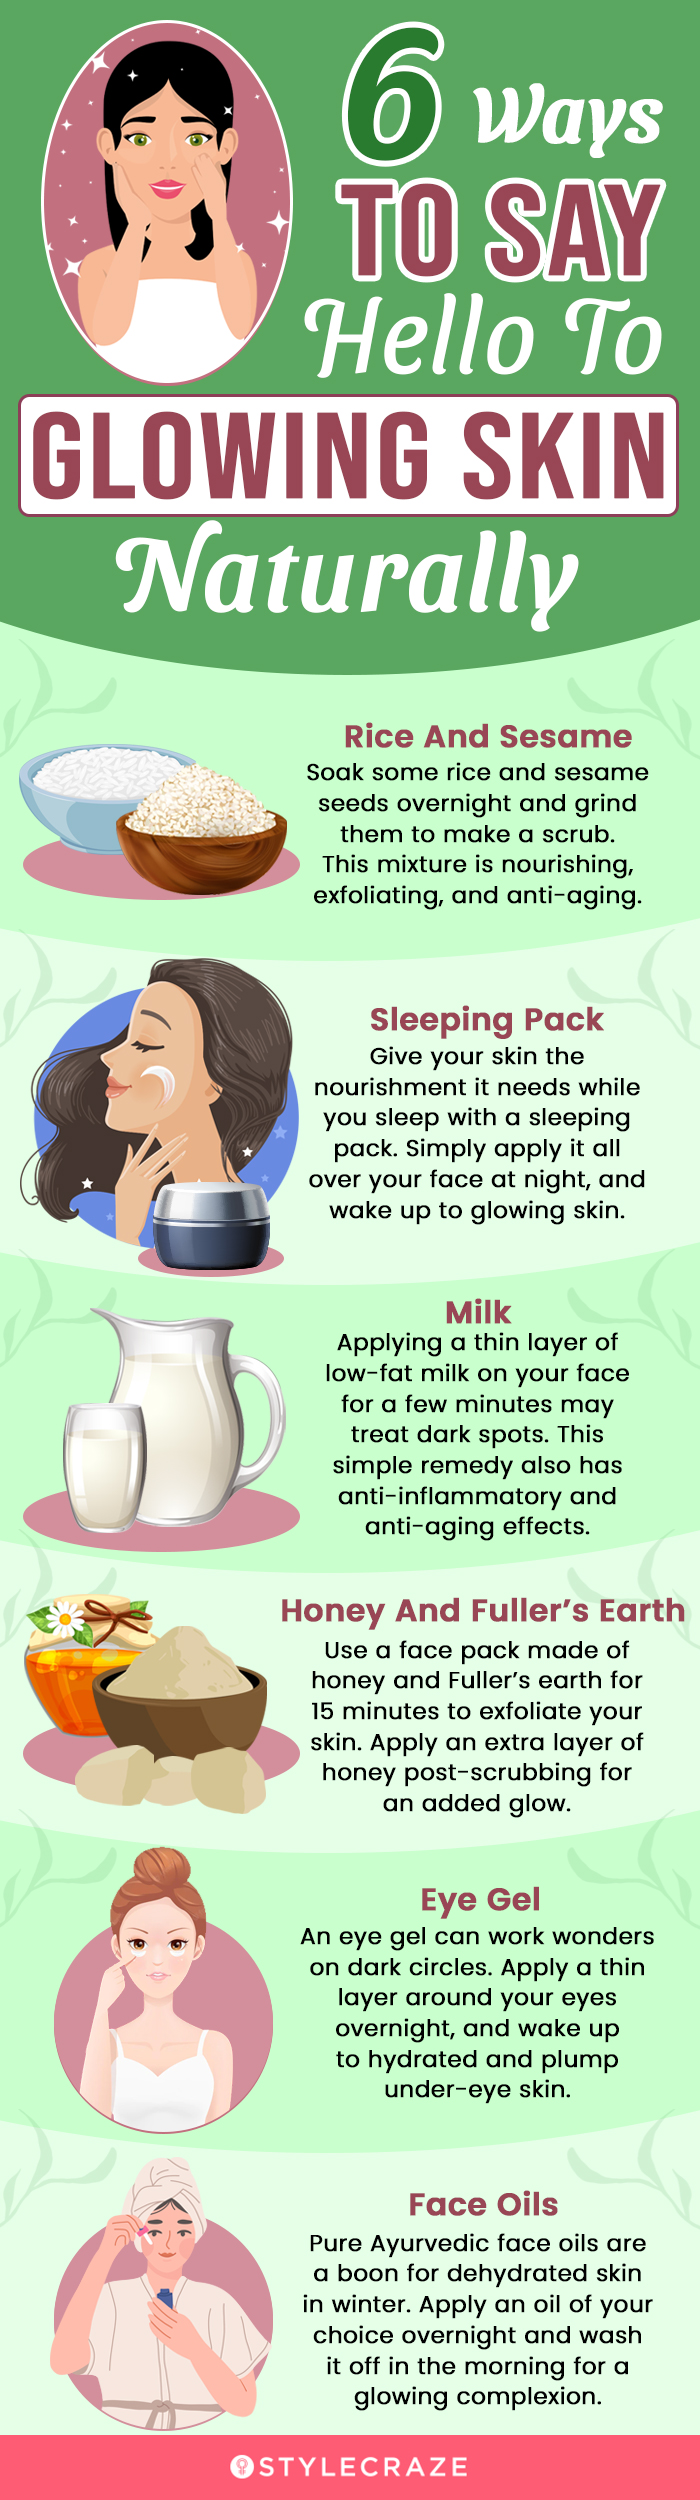 6 ways to say hello to glowing skin naturally (infographic)